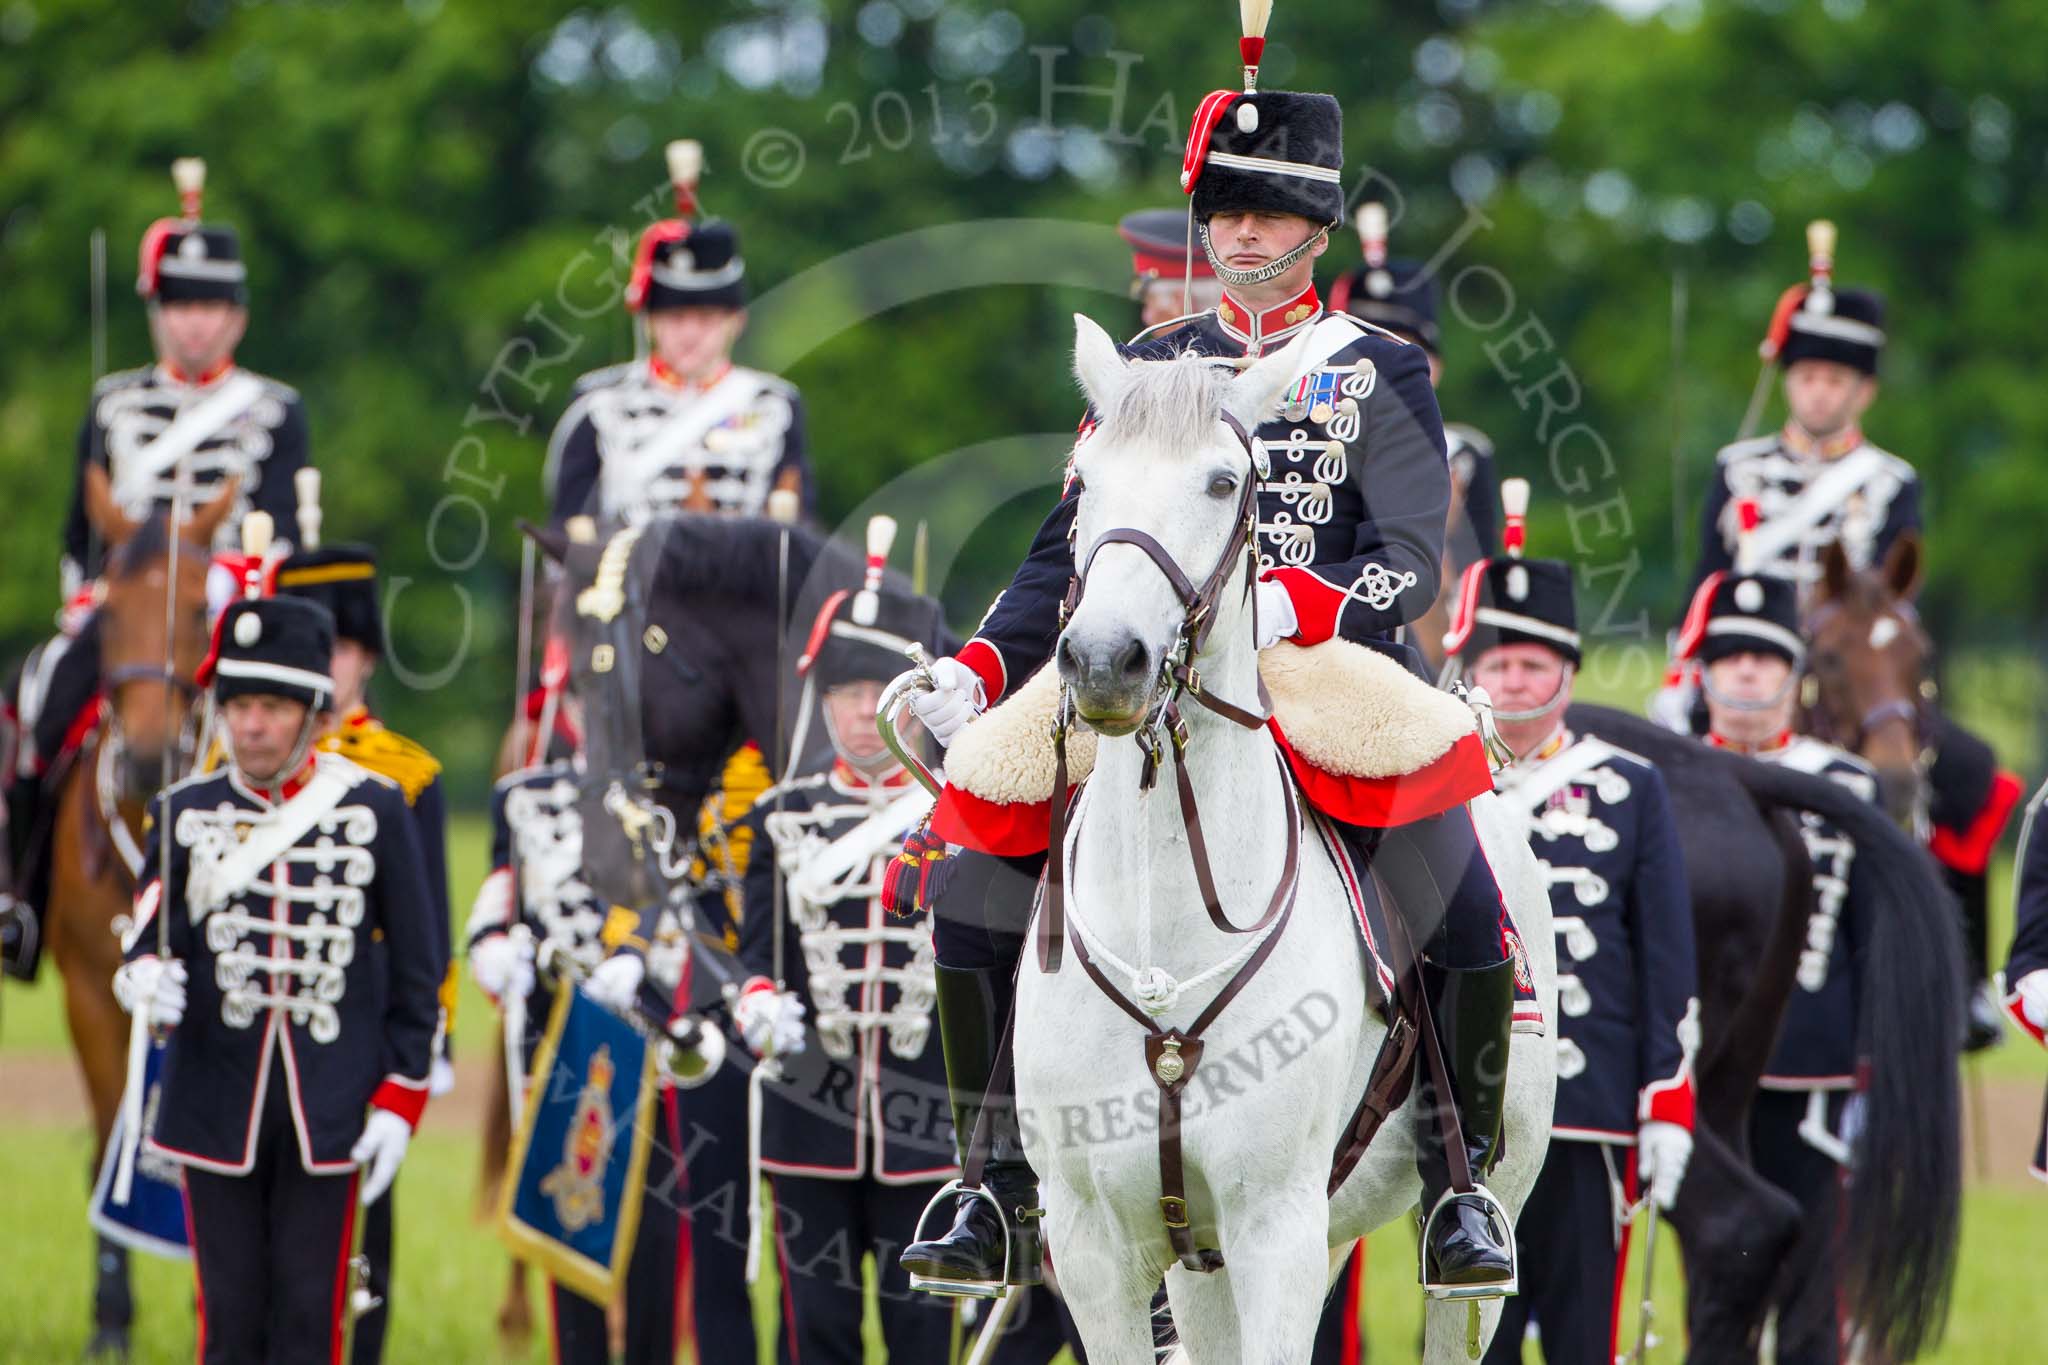 The Light Cavalry HAC Annual Review and Inspection 2013.
Windsor Great Park Review Ground,
Windsor,
Berkshire,
United Kingdom,
on 09 June 2013 at 13:26, image #354